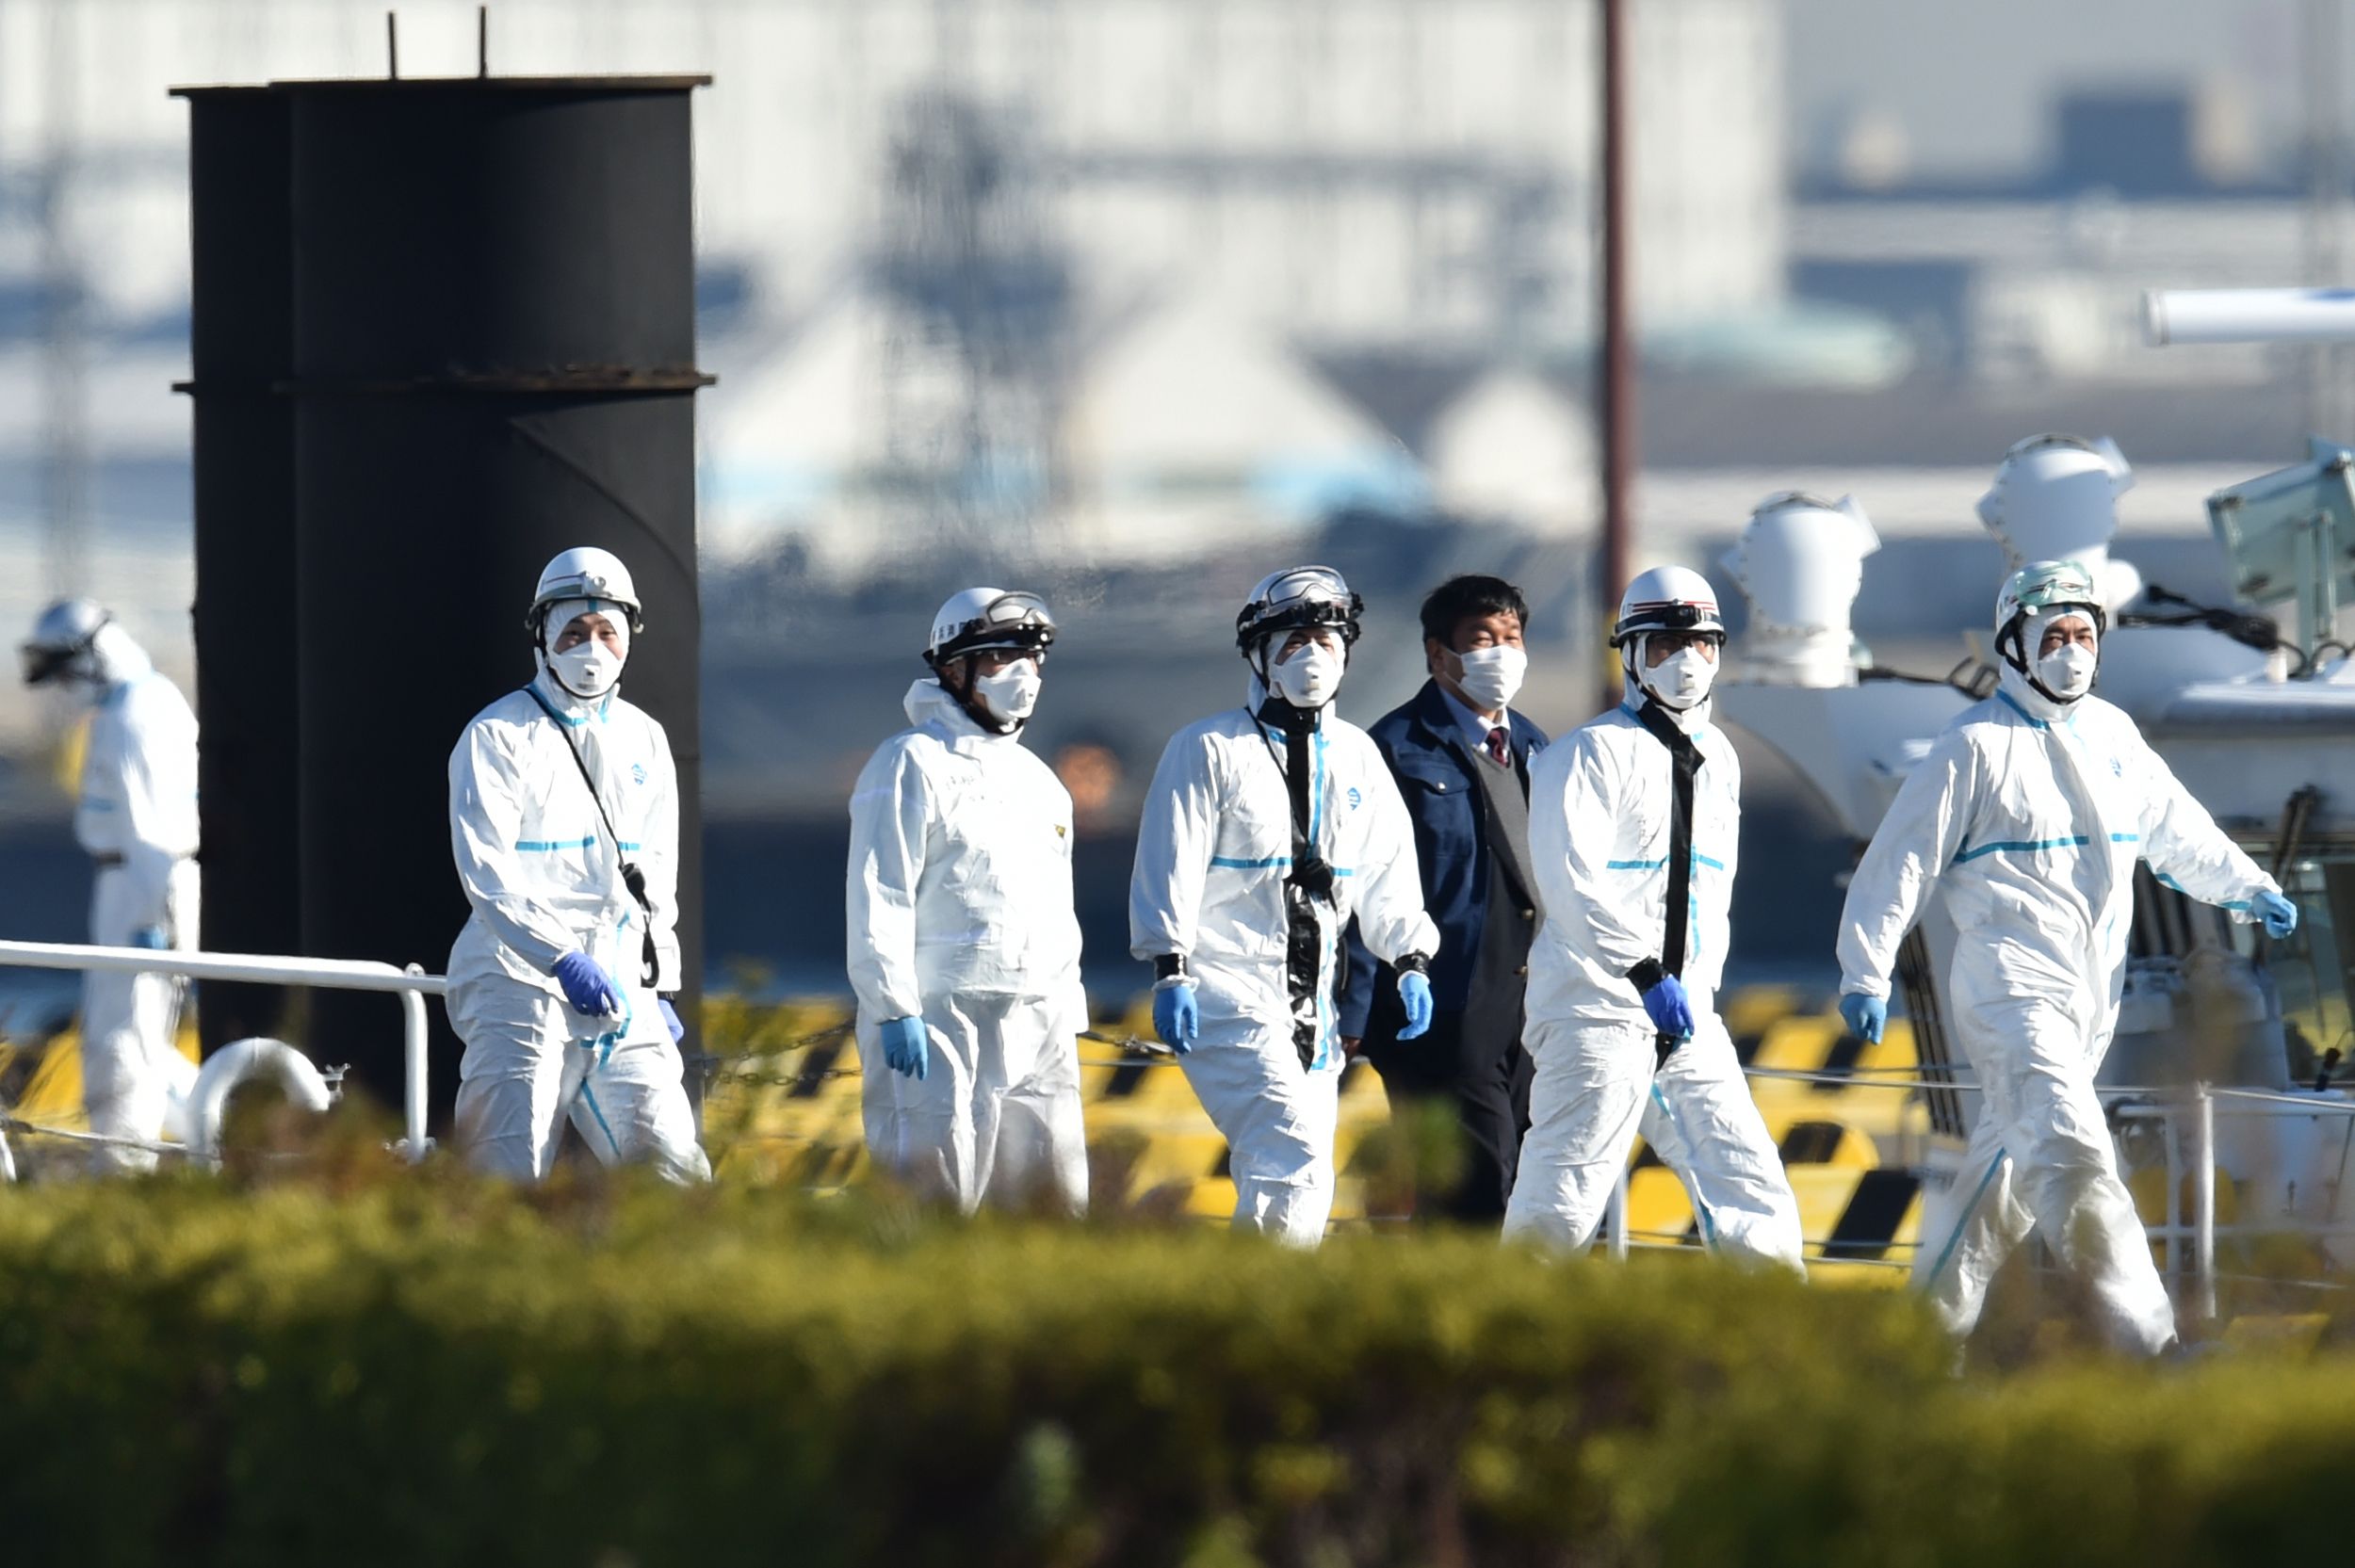 PHOTO: Personnel clad in protective gear, tasked to provide care for suspected coronavirus patients on board the Diamond Princess cruise ship, are seen at the Japan Coast Guard base in Yokohama on Feb. 5, 2020.